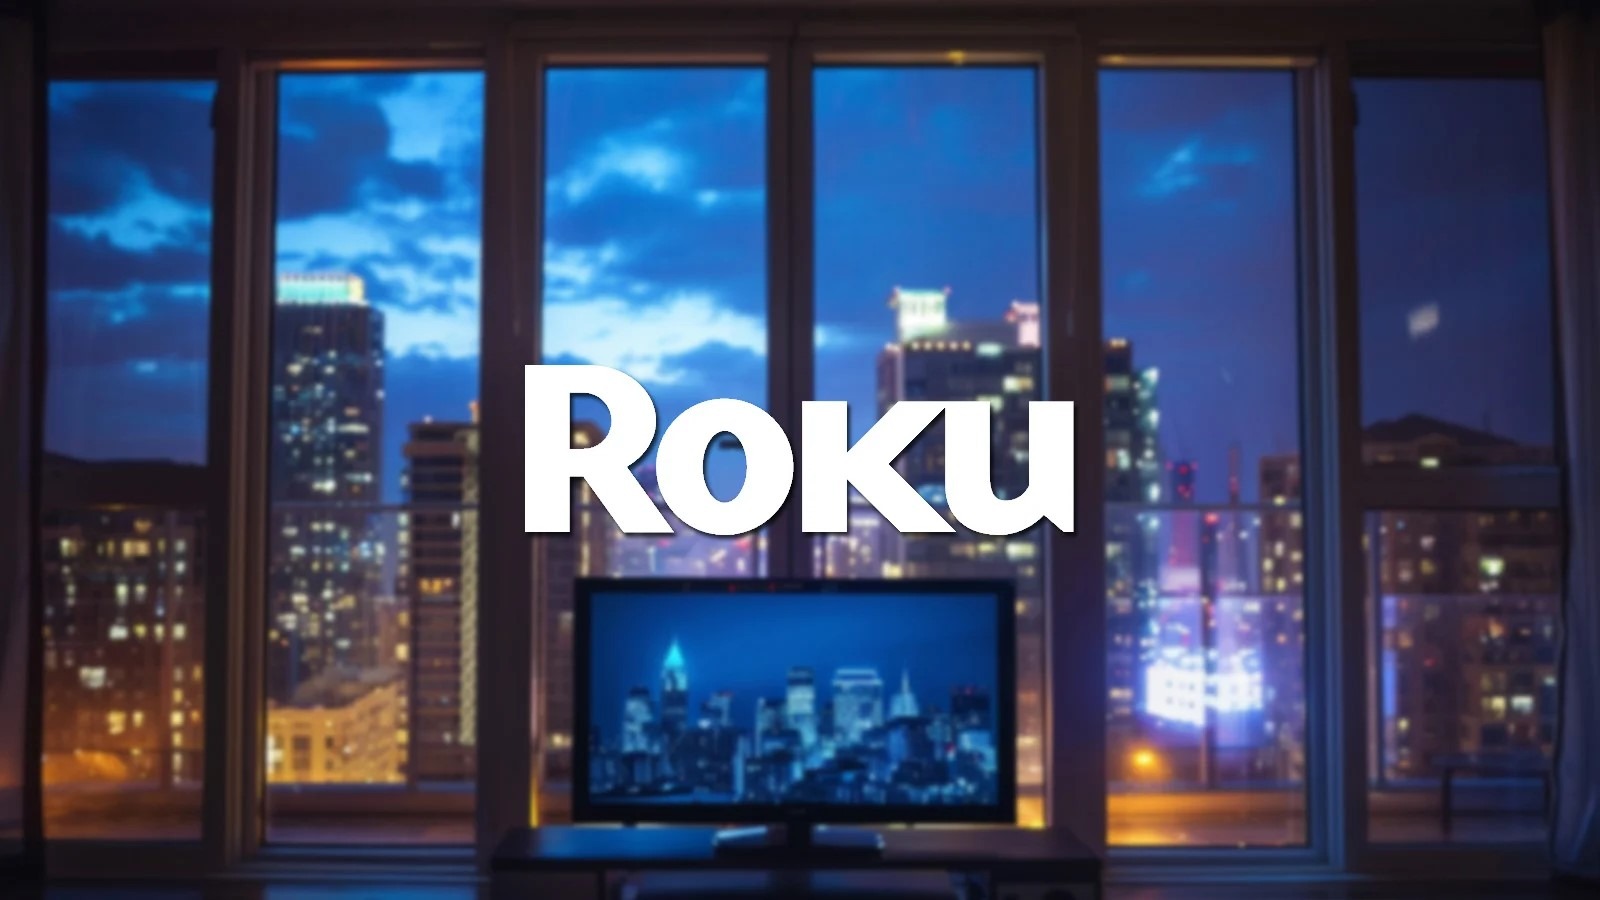 alt=Android TV screen showing Roku TV app icon.